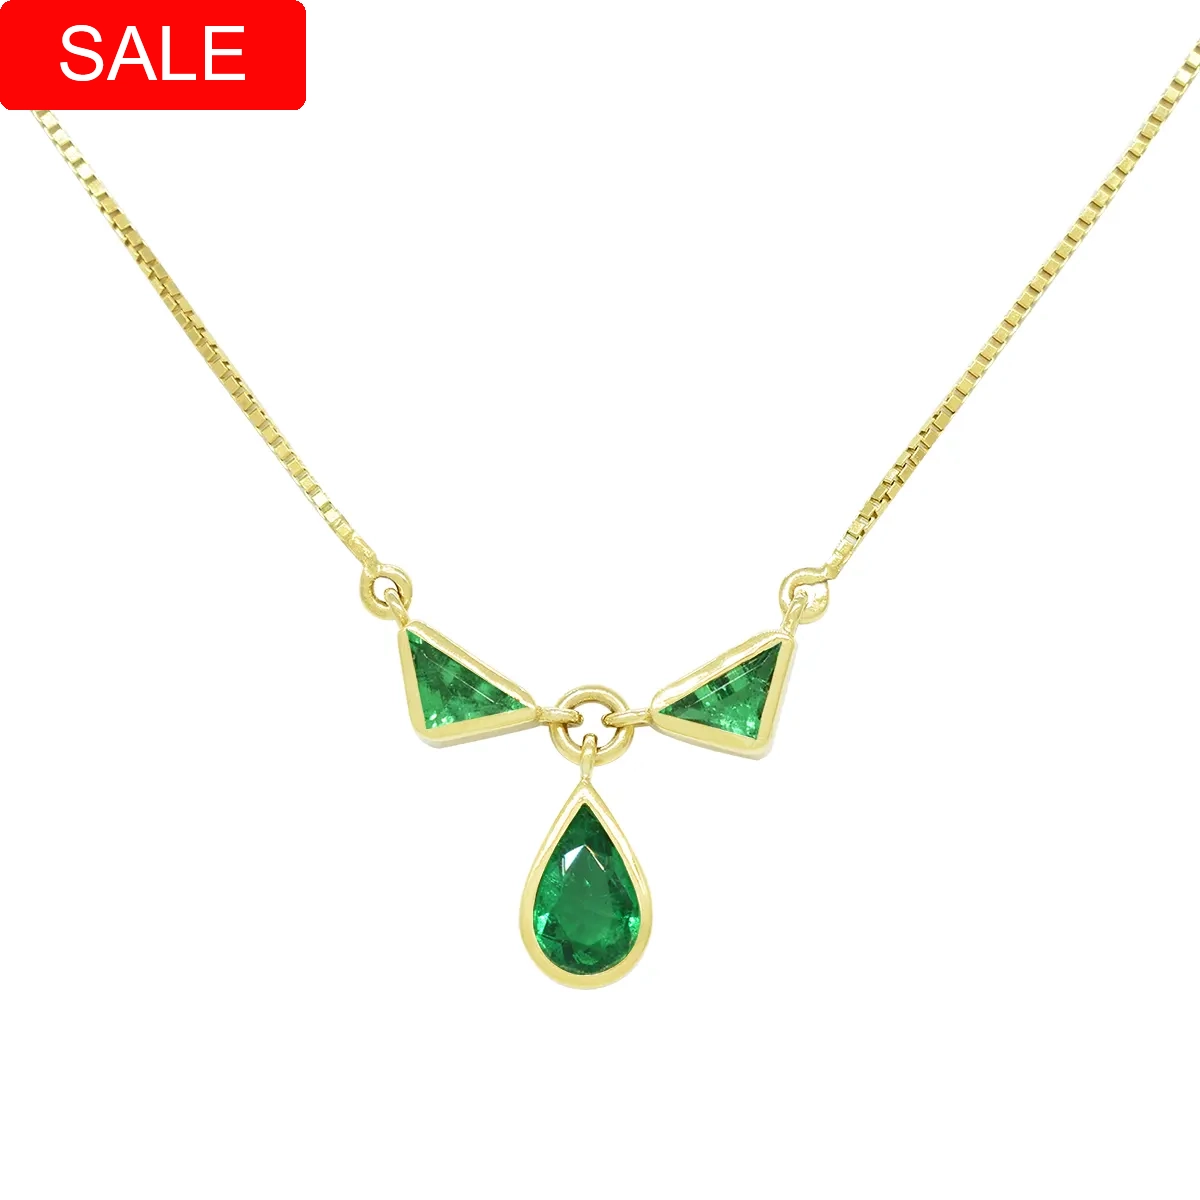 Triangle and Pear Shape Natural Colombian Emeralds Necklace in 18K Gold